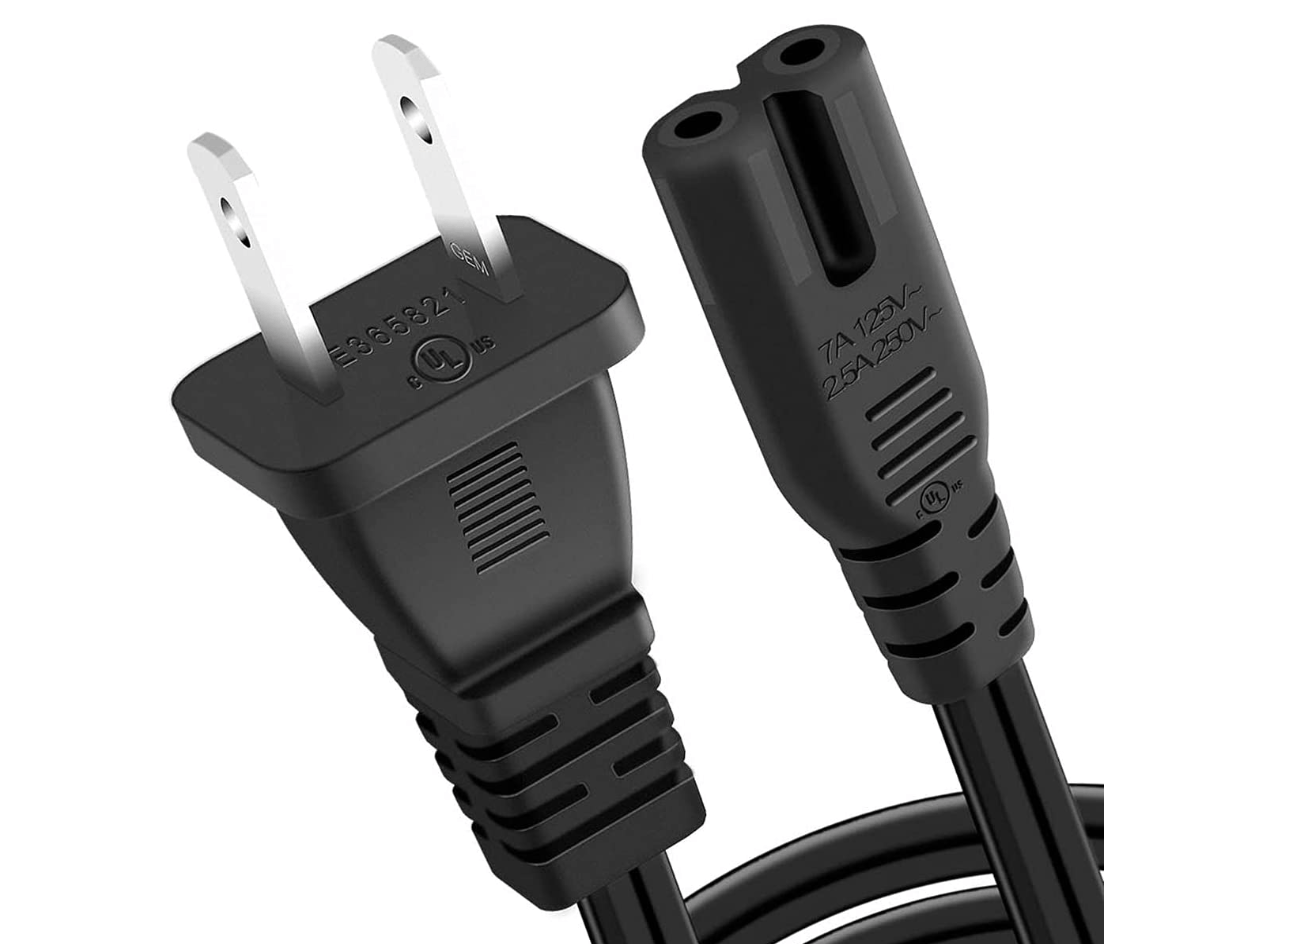 cable types - ac power cord